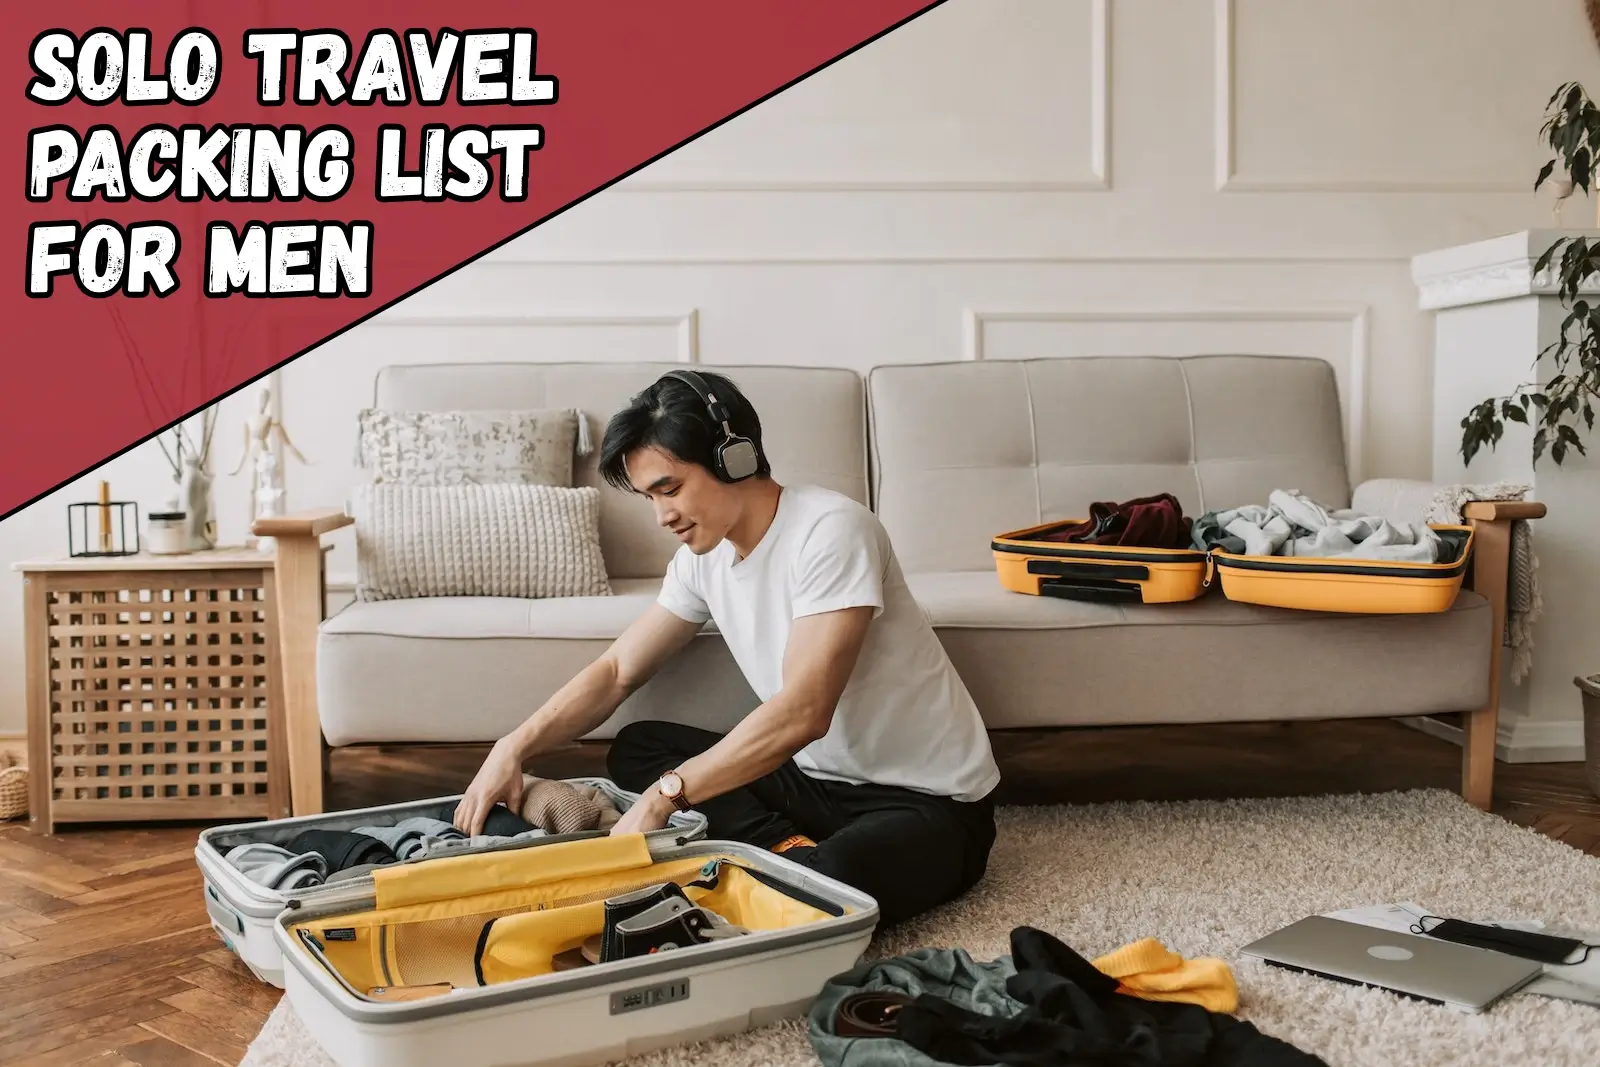 Airport Essentials  Road Trip Kit, Travel Packing List